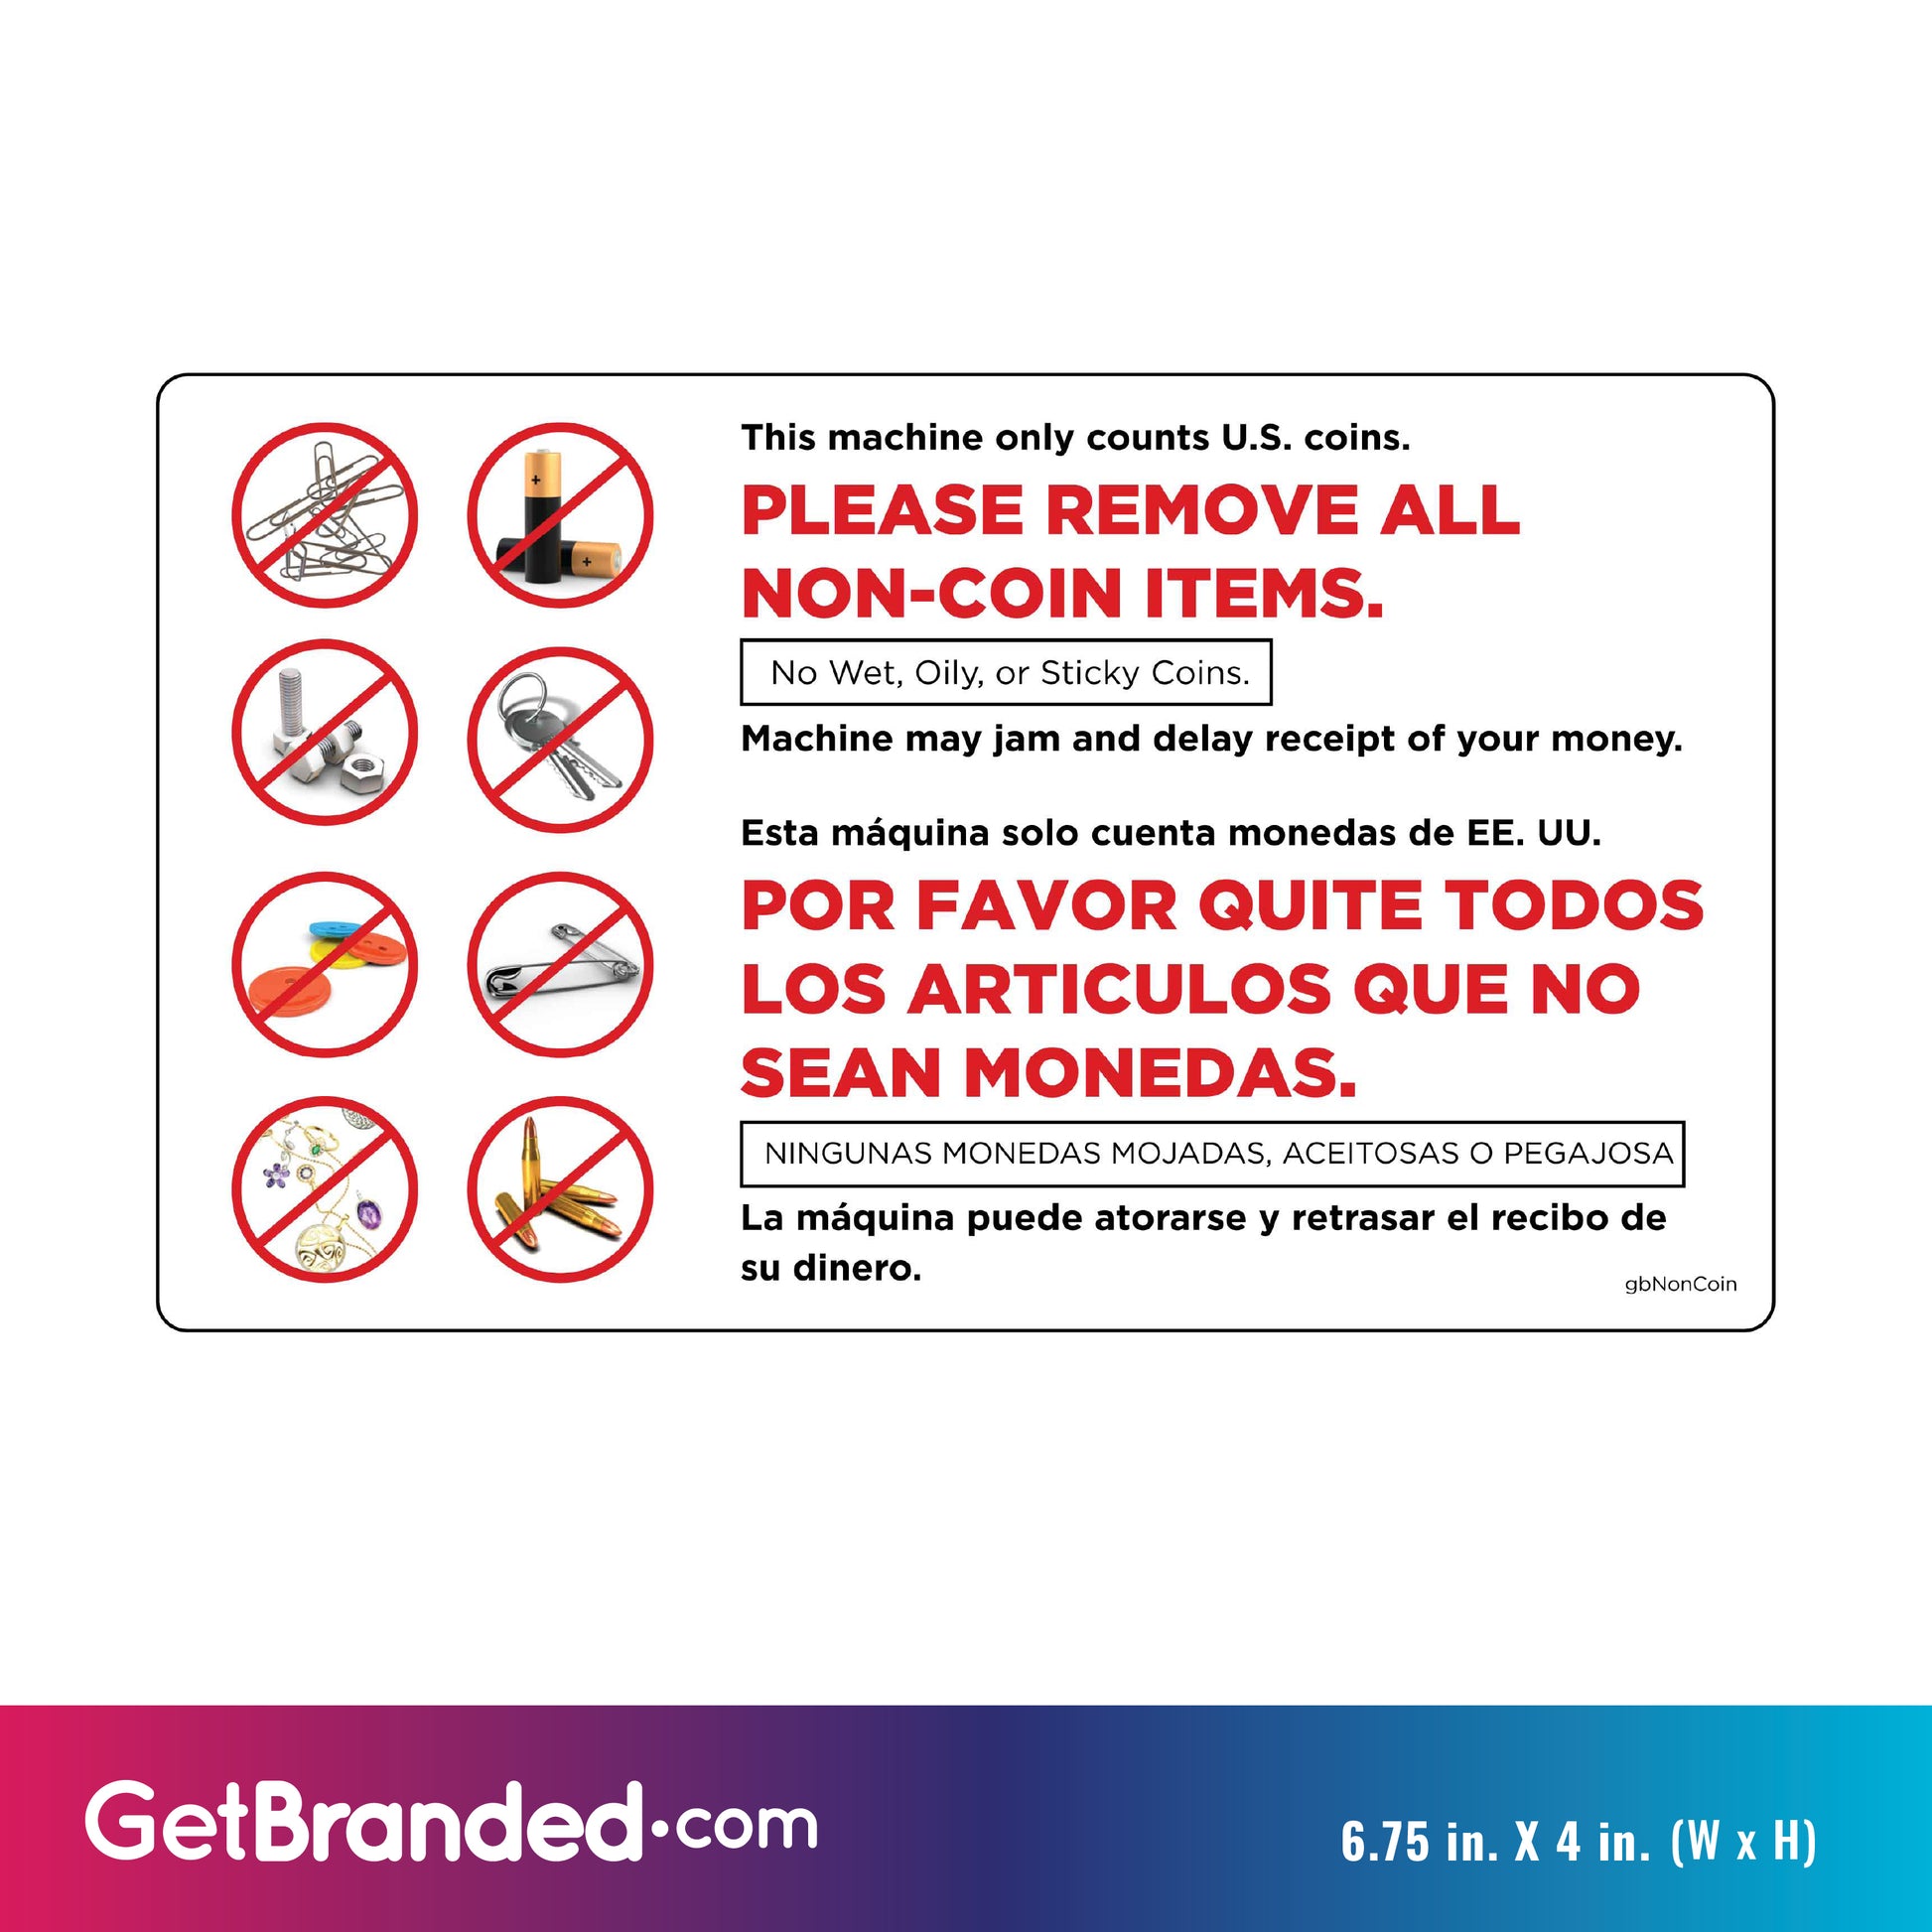 Please Remove All Non-Coin Items Decal in English/Spanish size guide.